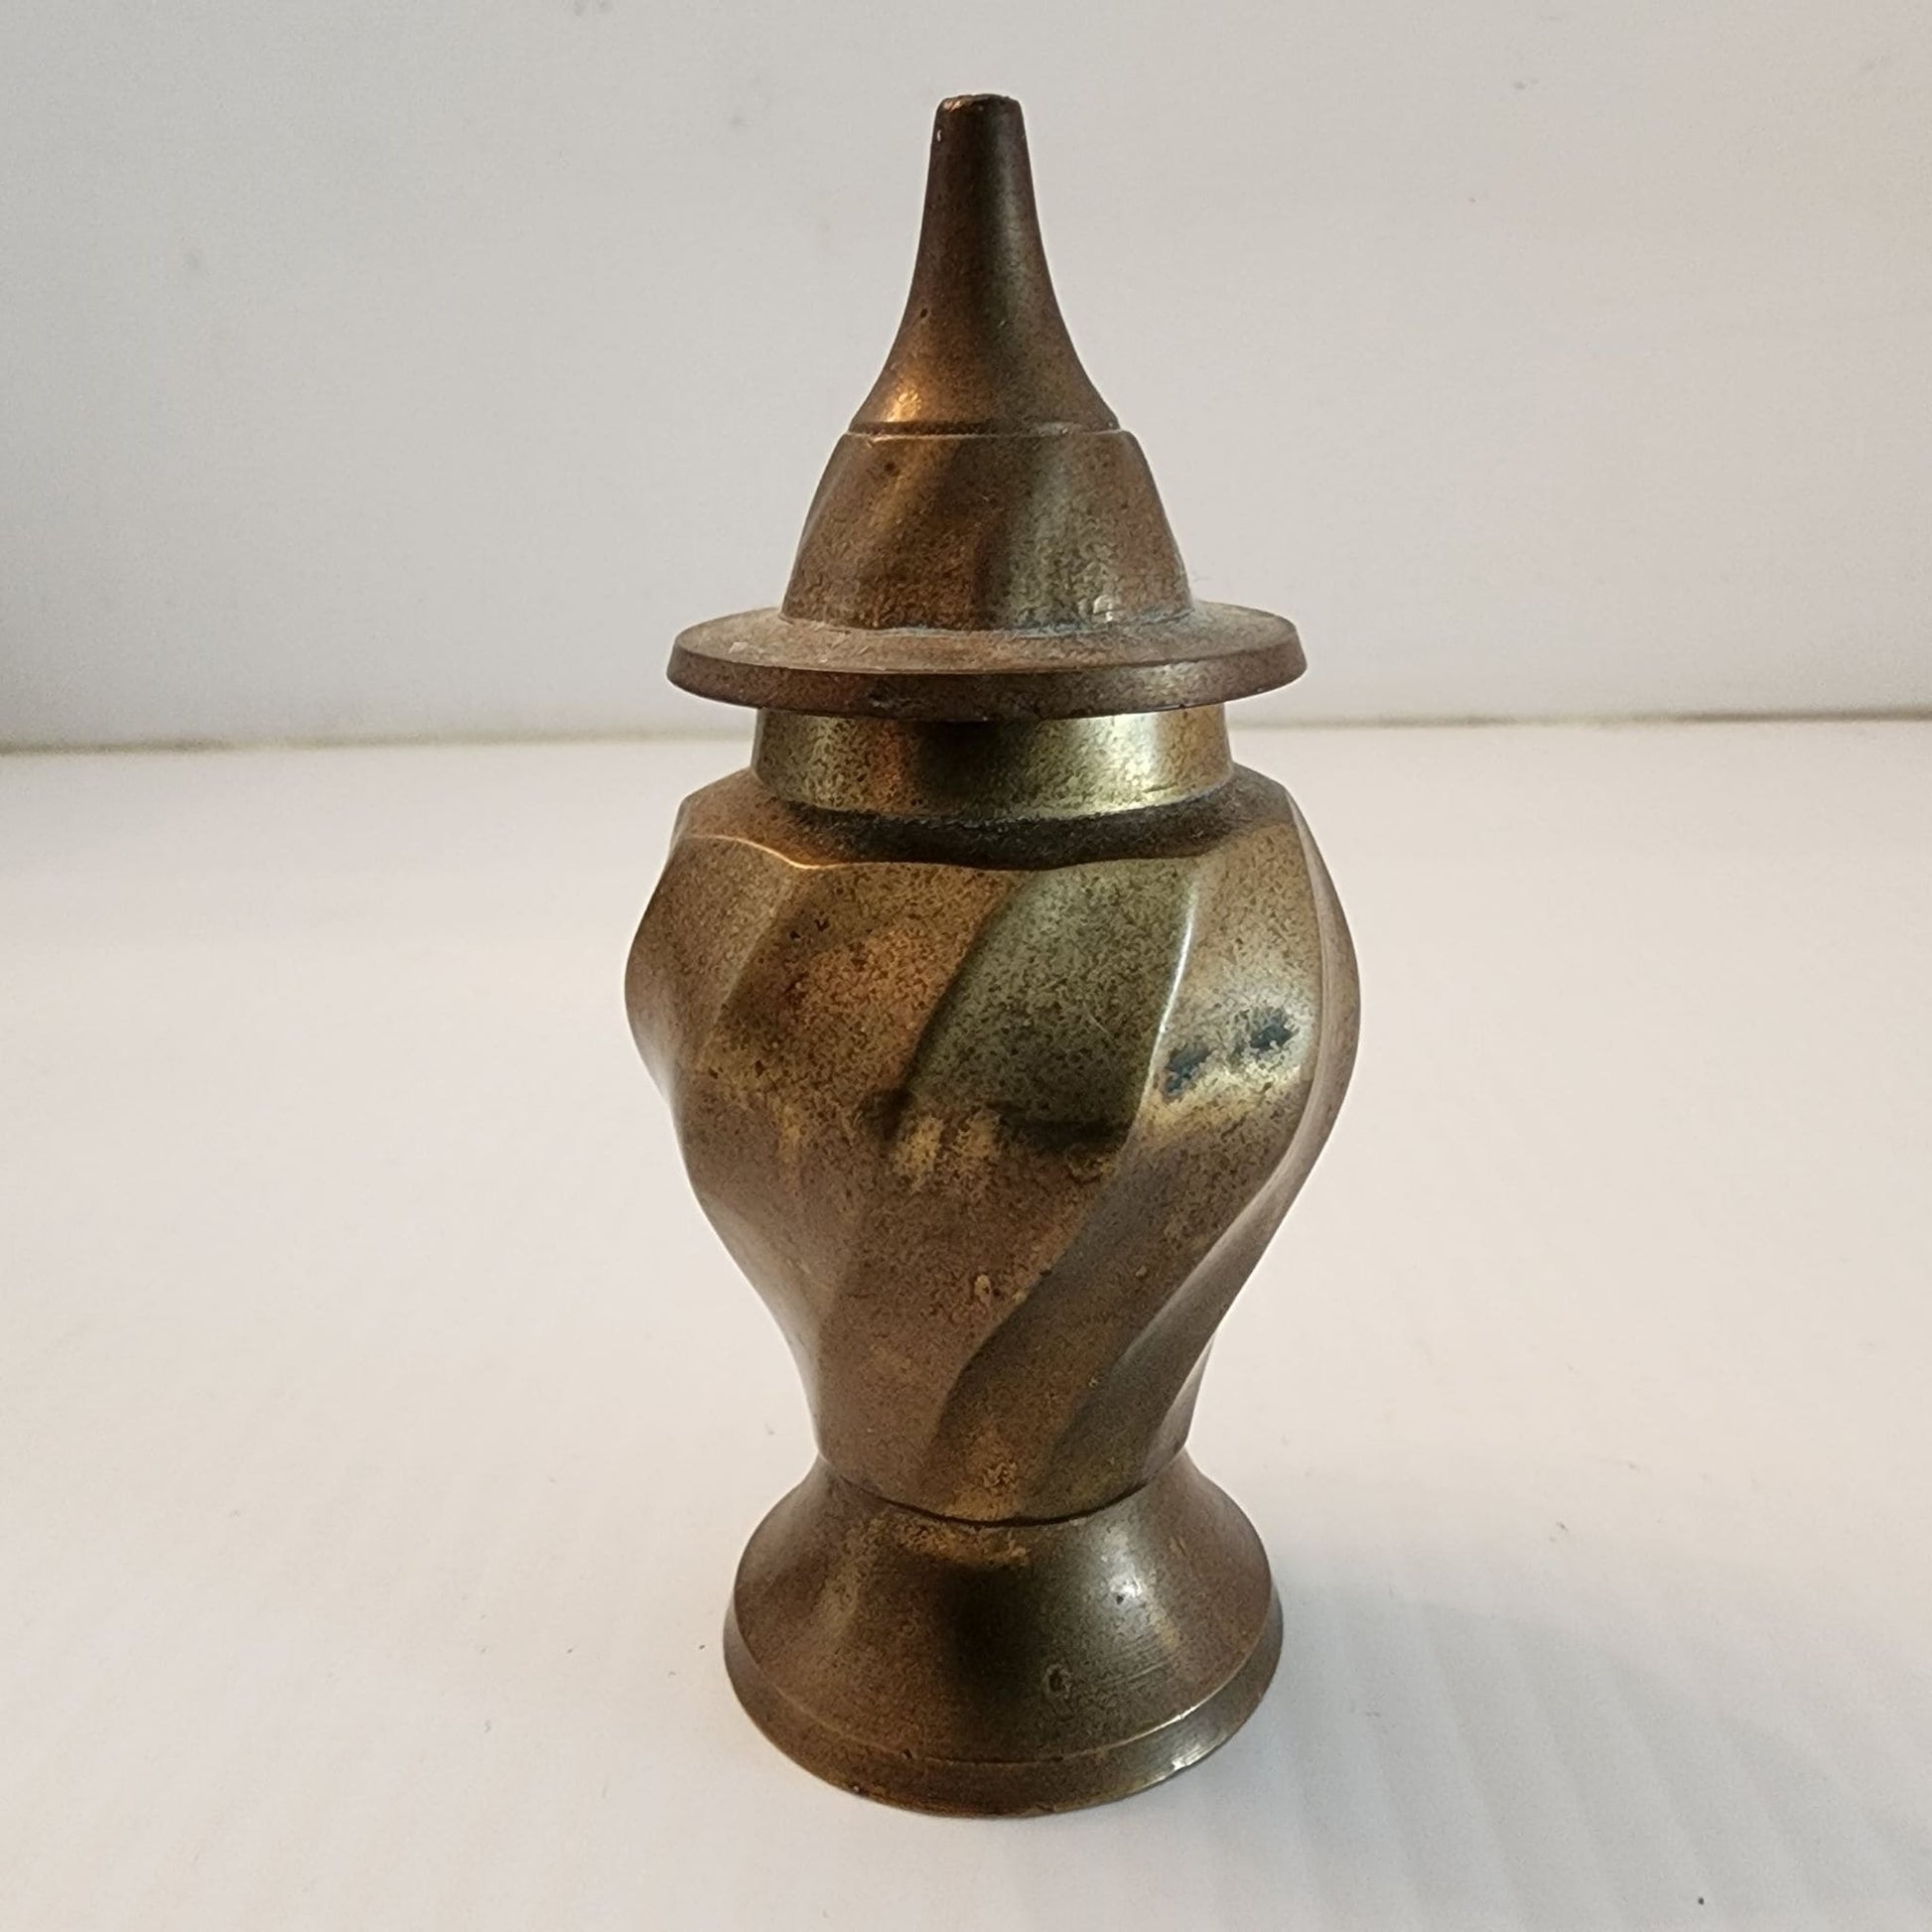 A brass vase with a small lid on top, adding elegance and charm to any space.